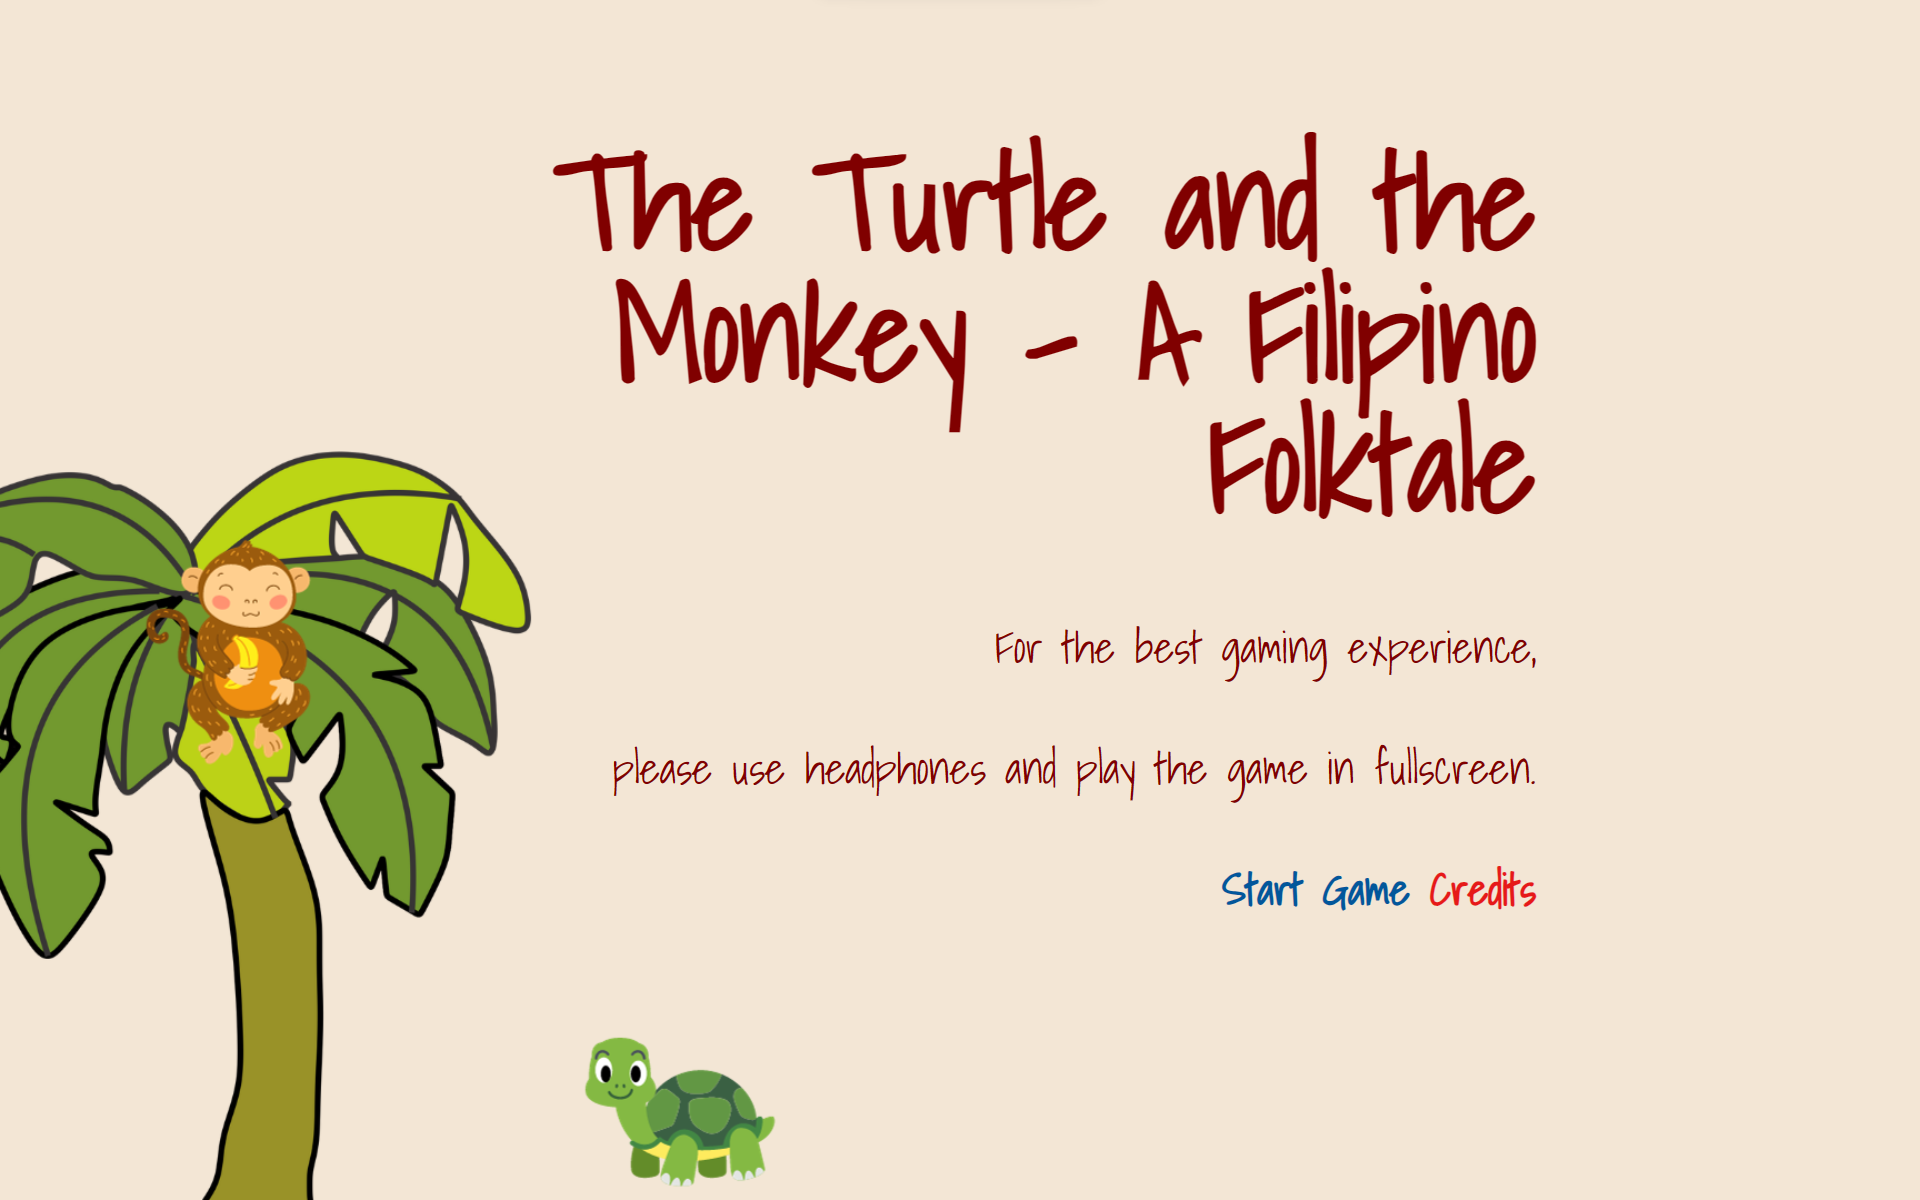 The Turtle and the Monkey - A Filipino Folktale